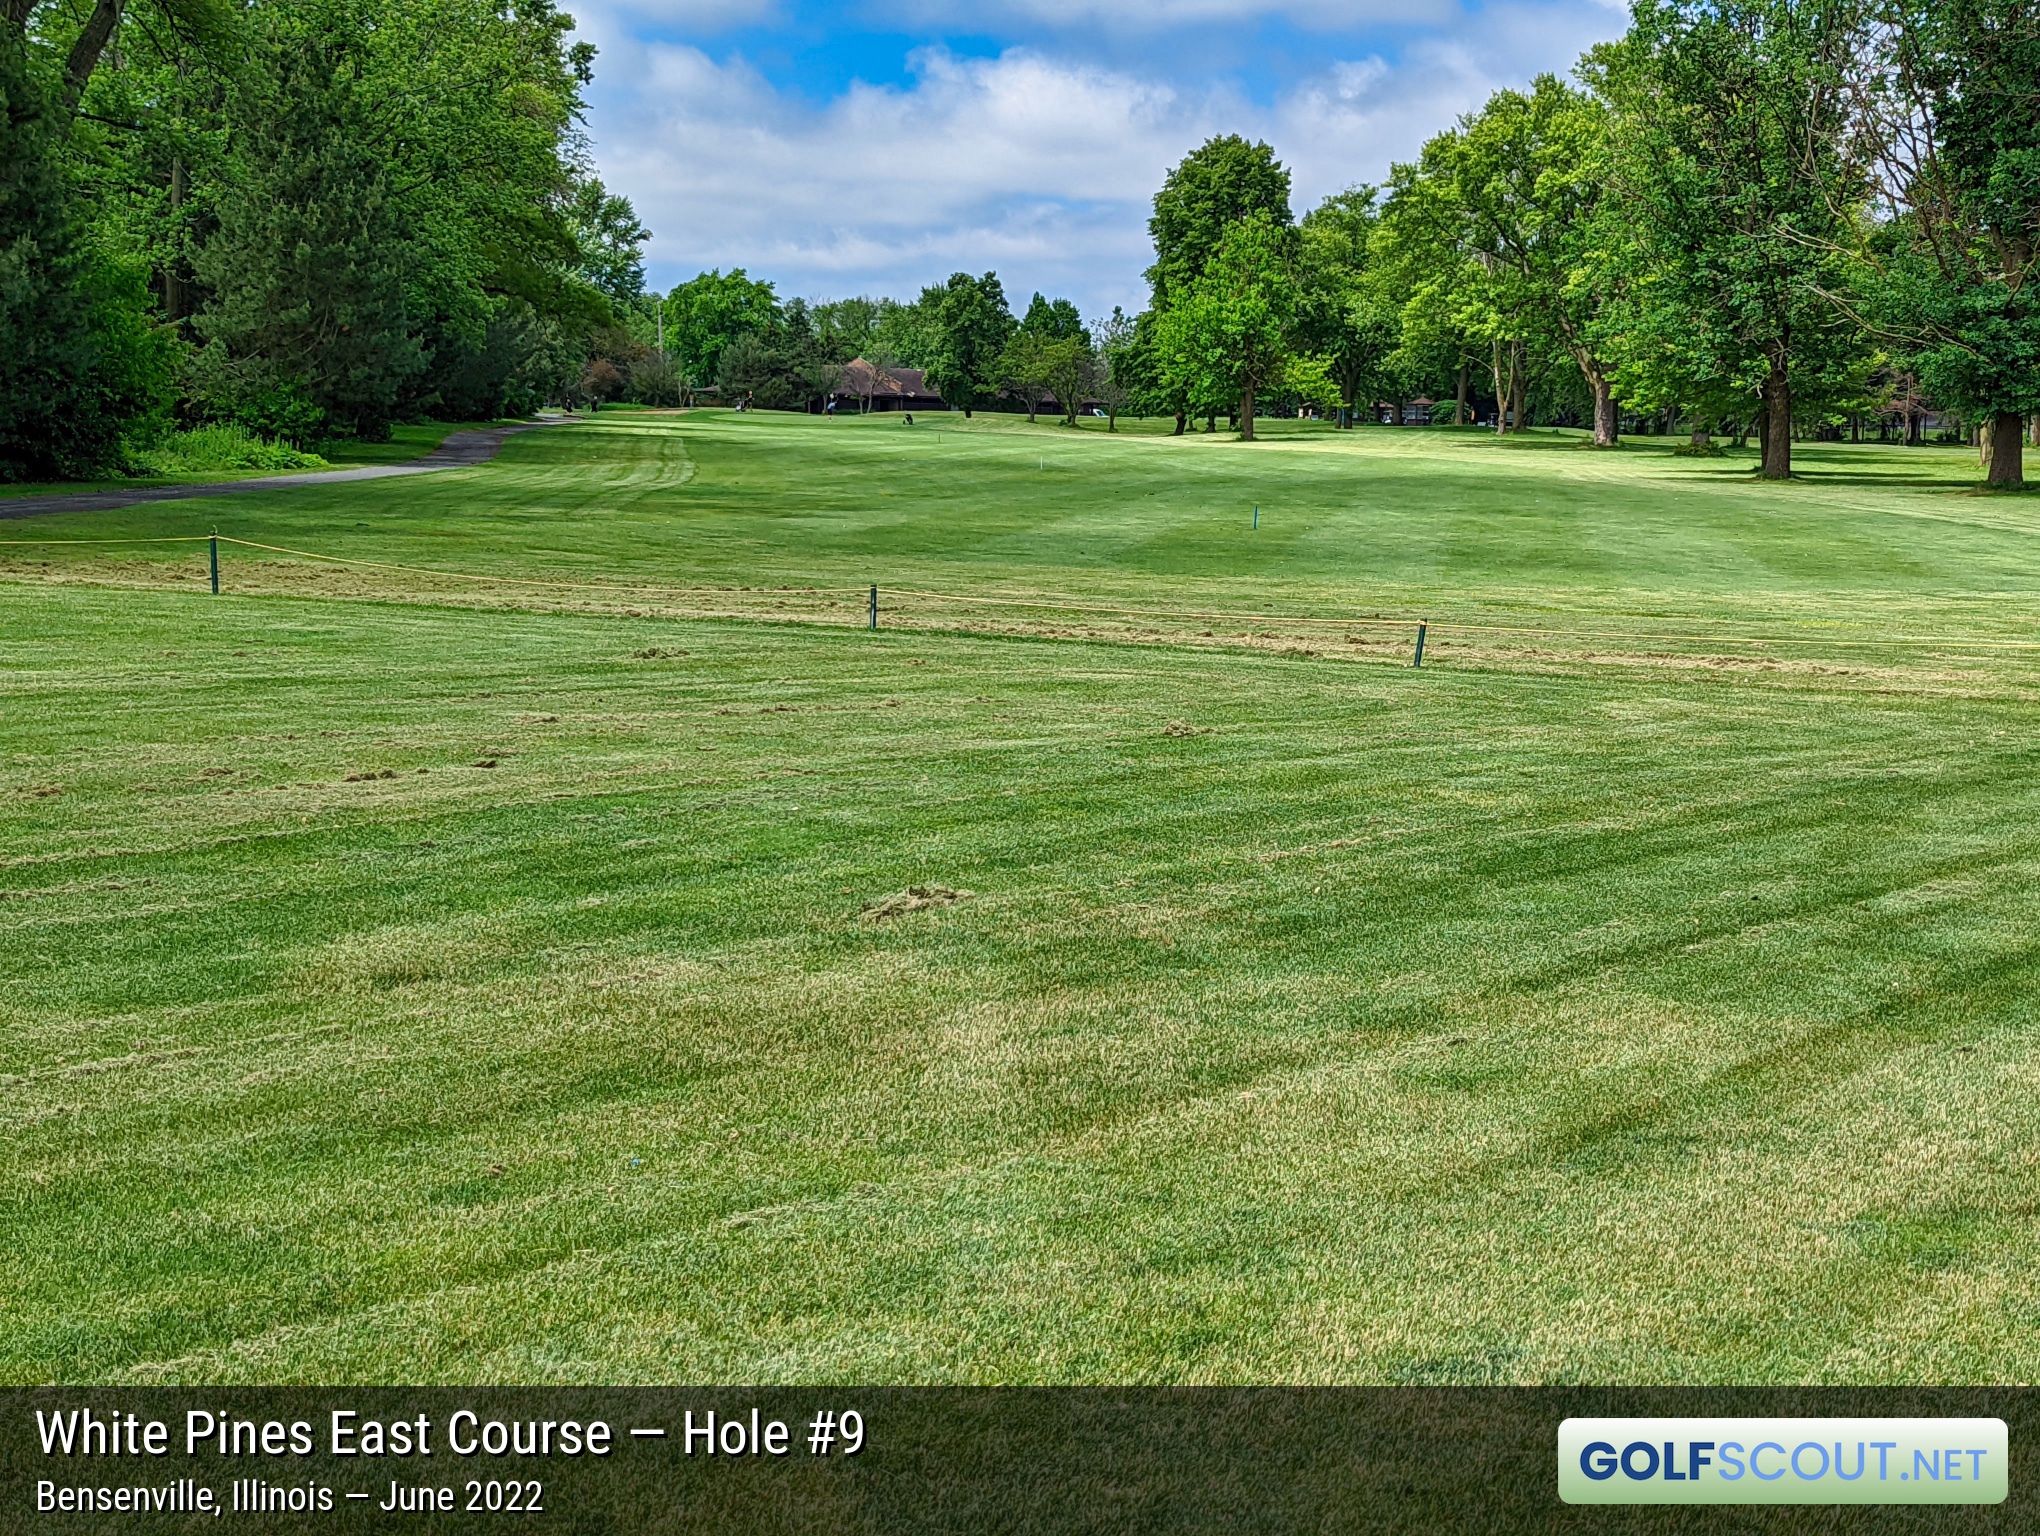 Photo of hole #9 at White Pines East Course in Bensenville, Illinois. 